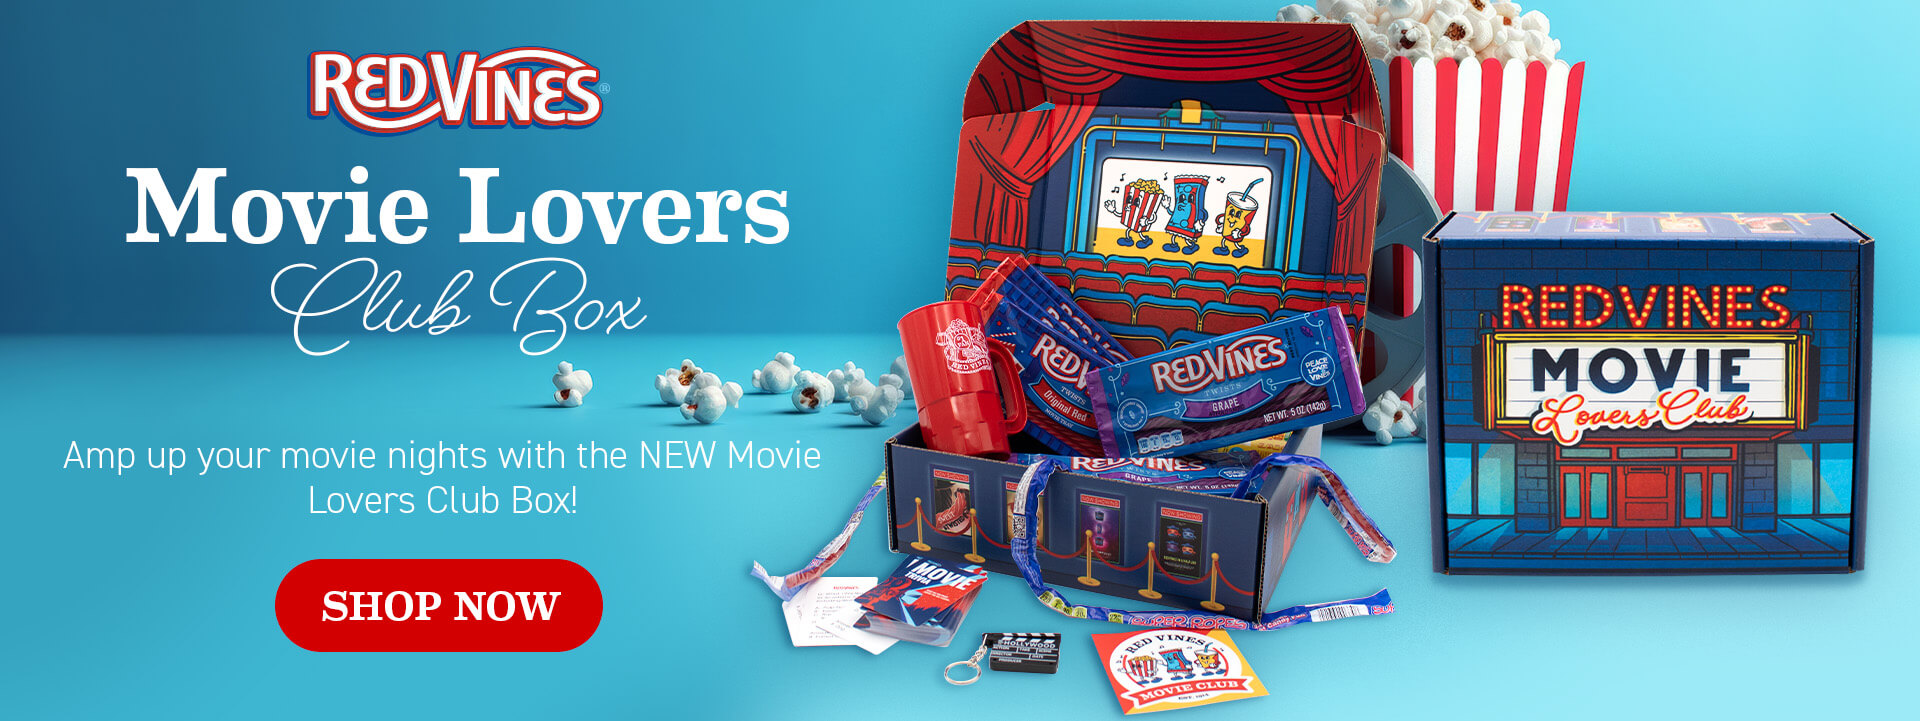 Red Vines Movie Lovers Club Box. Amp up your movie nights with the NEW Movie Lovers Club Box! Shop Now